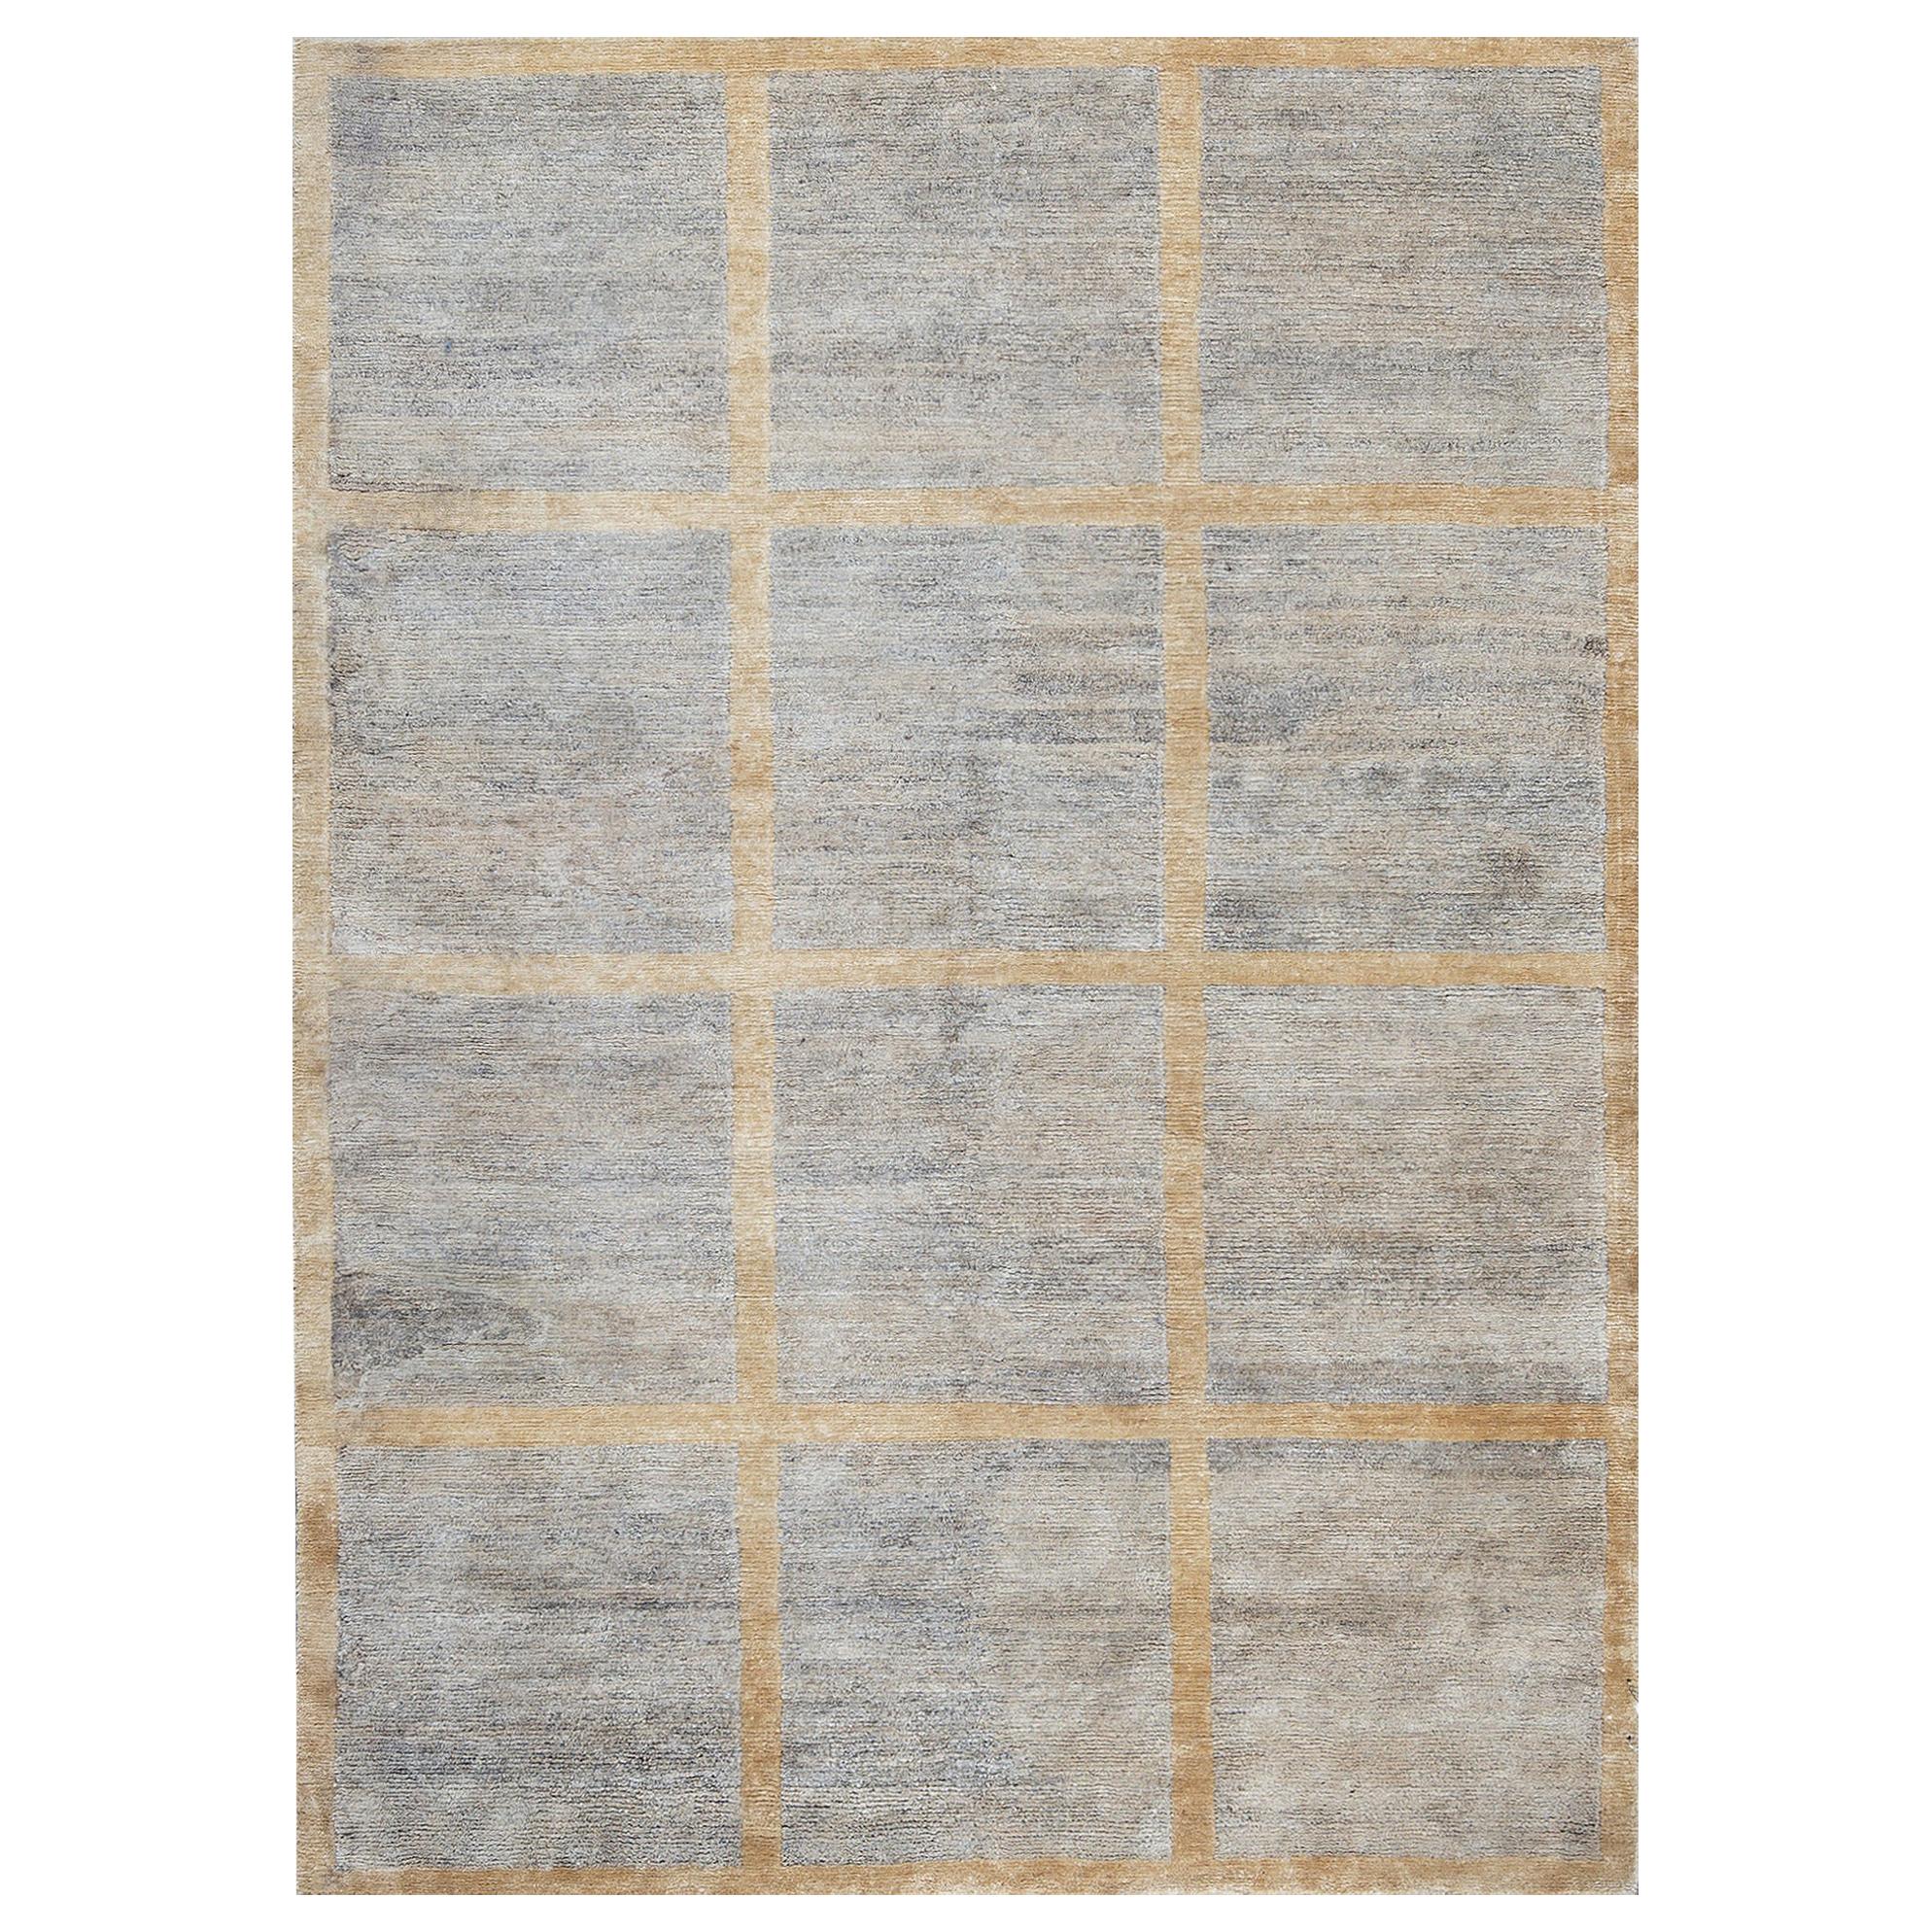 One of a Kind Contemporary Handwoven Wool Area Rug  5' x 8’.  